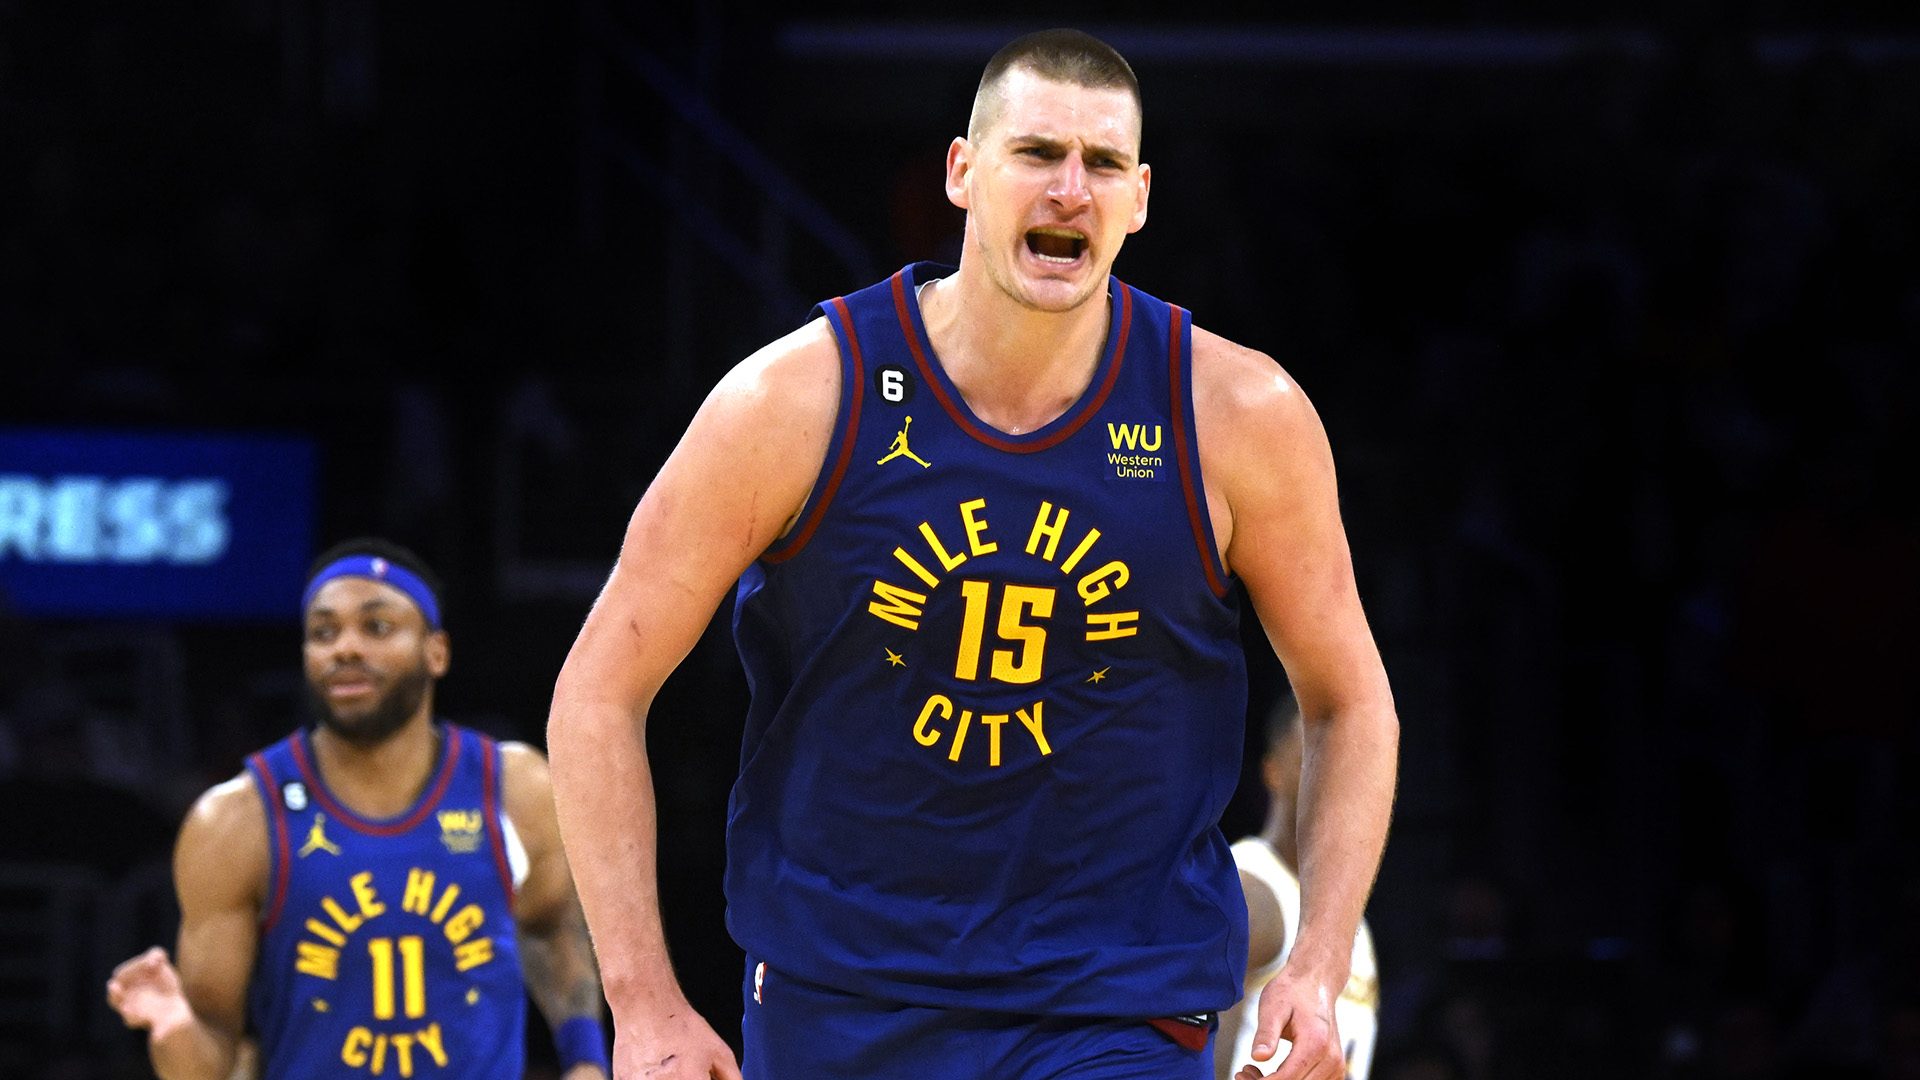 Nikola Jokic #15 of the Denver Nuggets react after a three point basket against the Los Angeles Lakers in the second half of game 3 of a Western Conference finals NBA playoff basketball game at Crypto.com Arena in Los Angeles on Saturday, May 20, 2023.